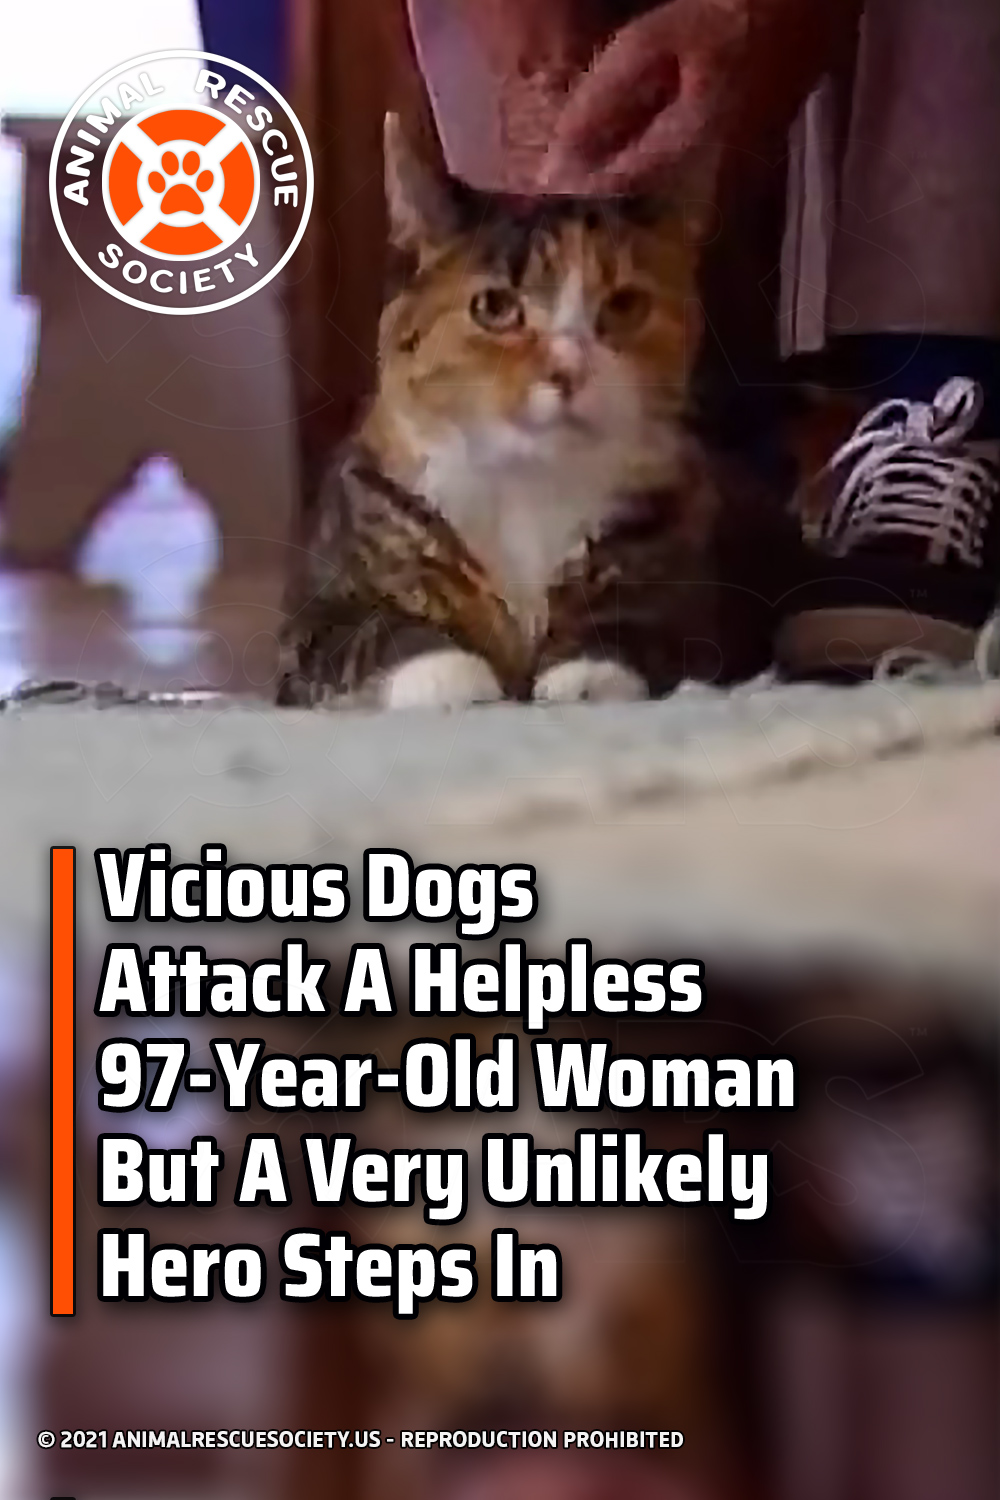 Vicious Dogs Attack A Helpless 97-Year-Old Woman But A Very Unlikely Hero Steps In